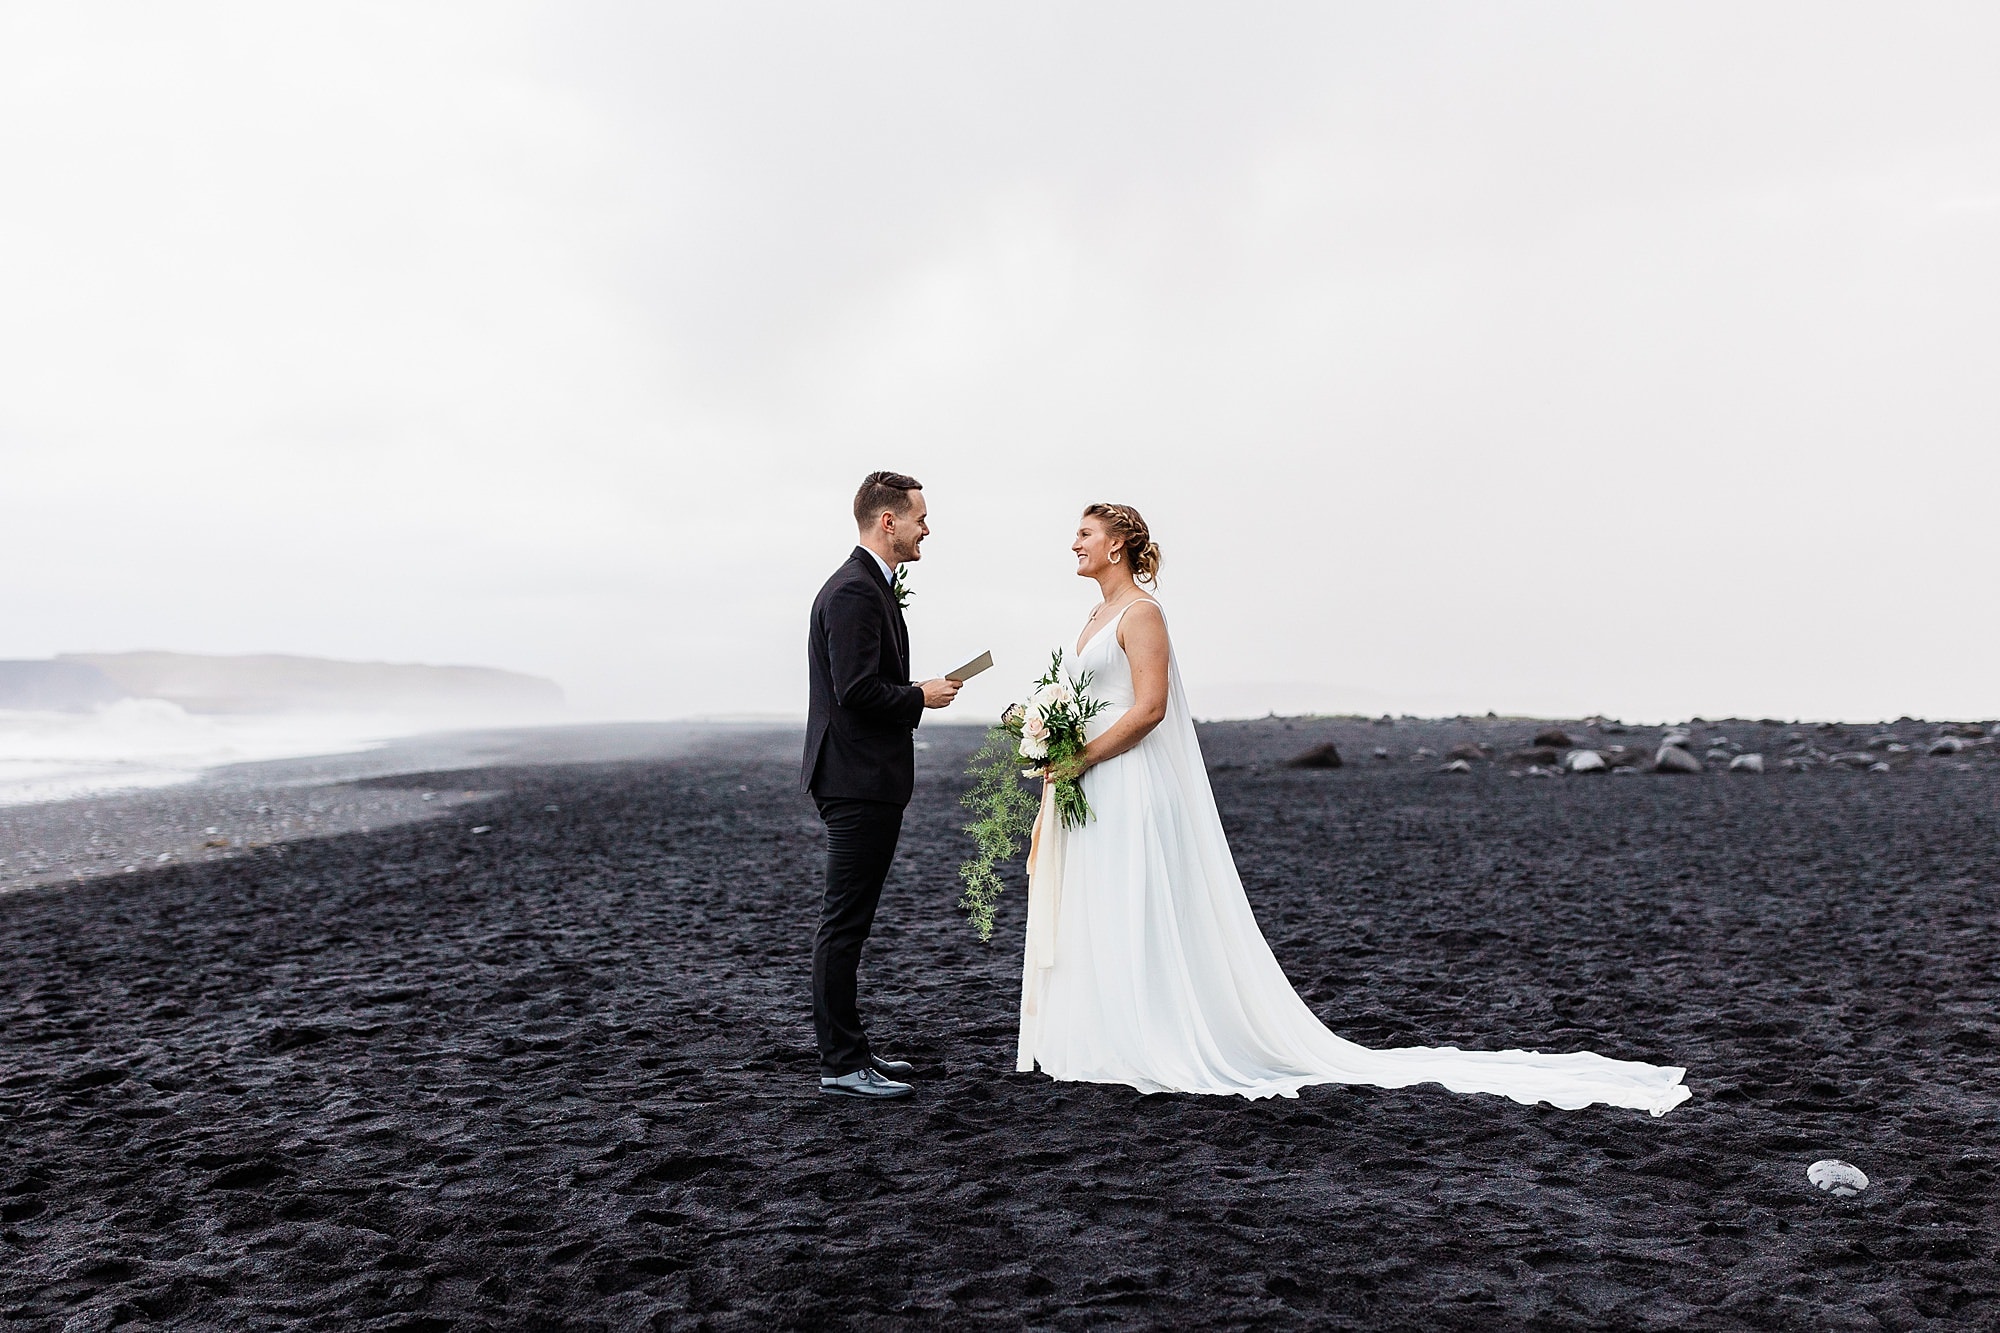 A couple says their vow son Black Sand Beach as they elope in Iceland